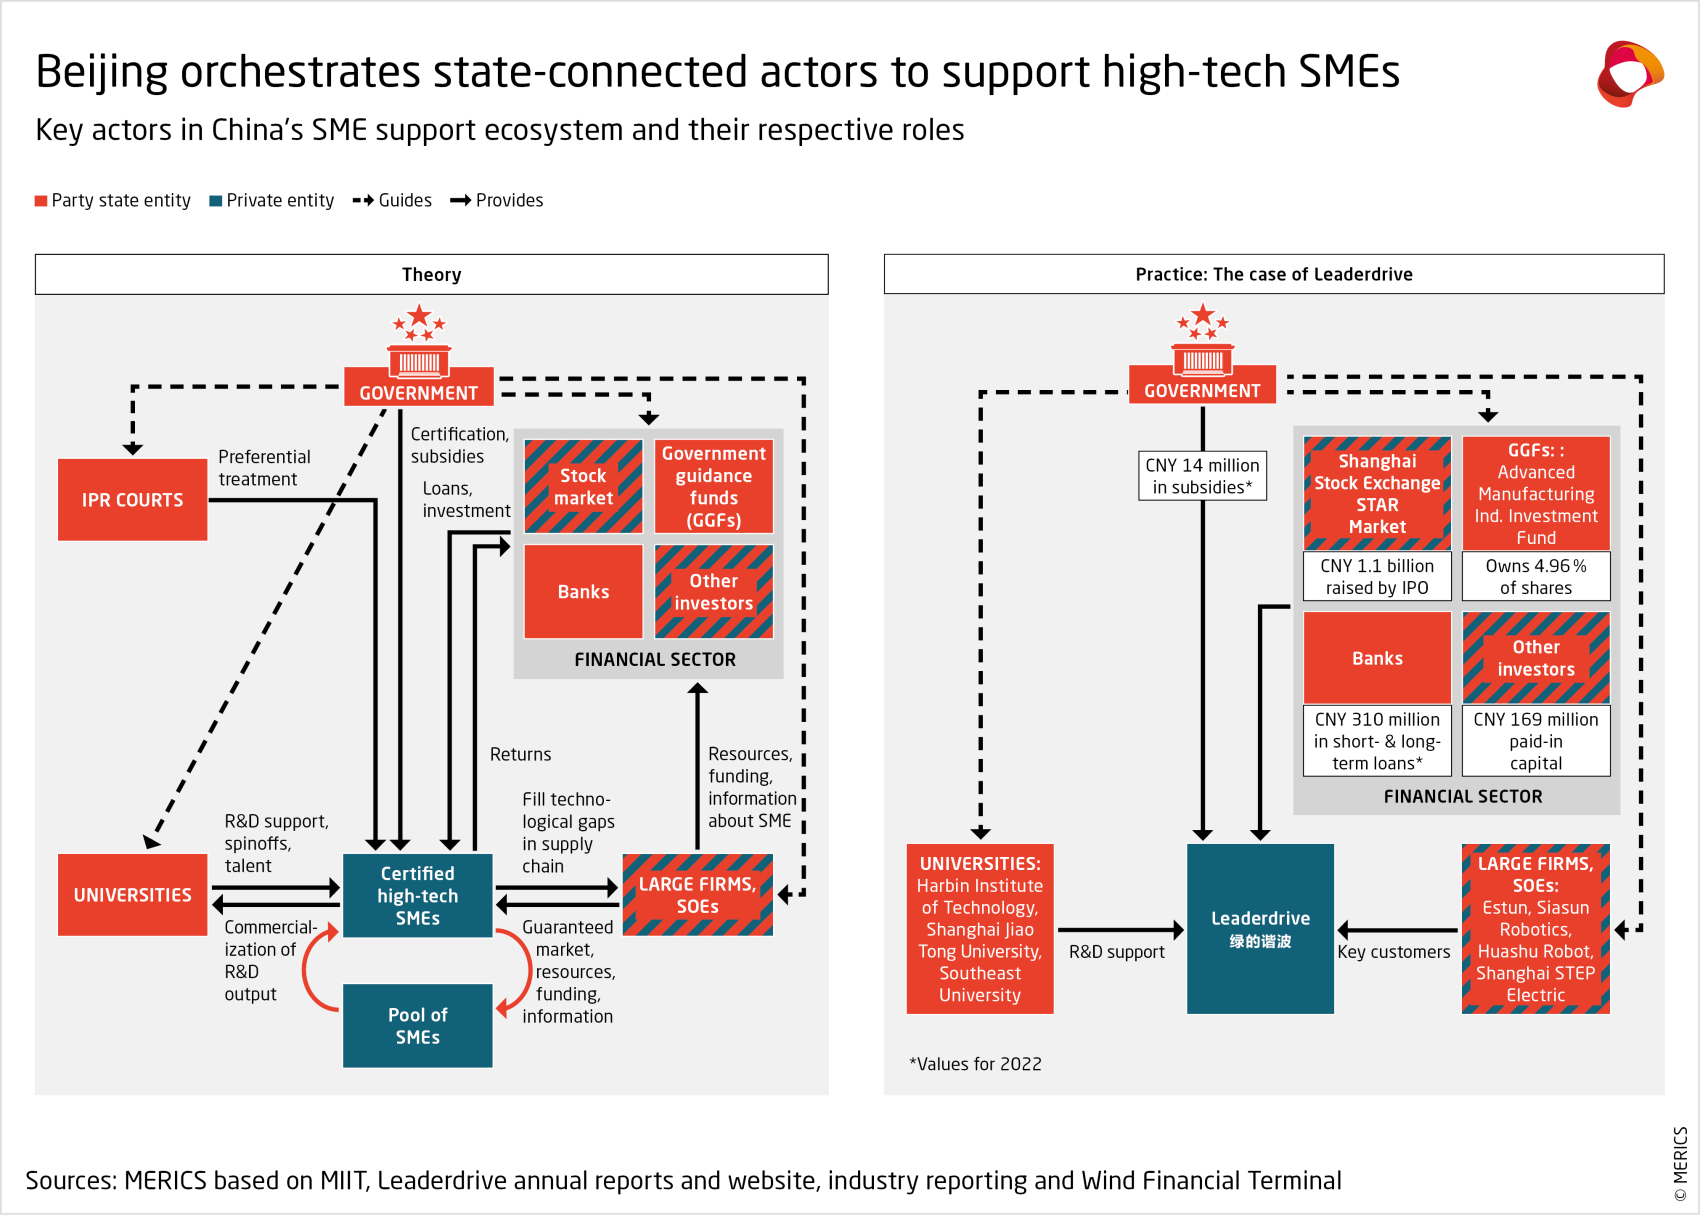 merics-report-accelerator-state-key-actors-in-chinas-sme-support-ecosystem.png